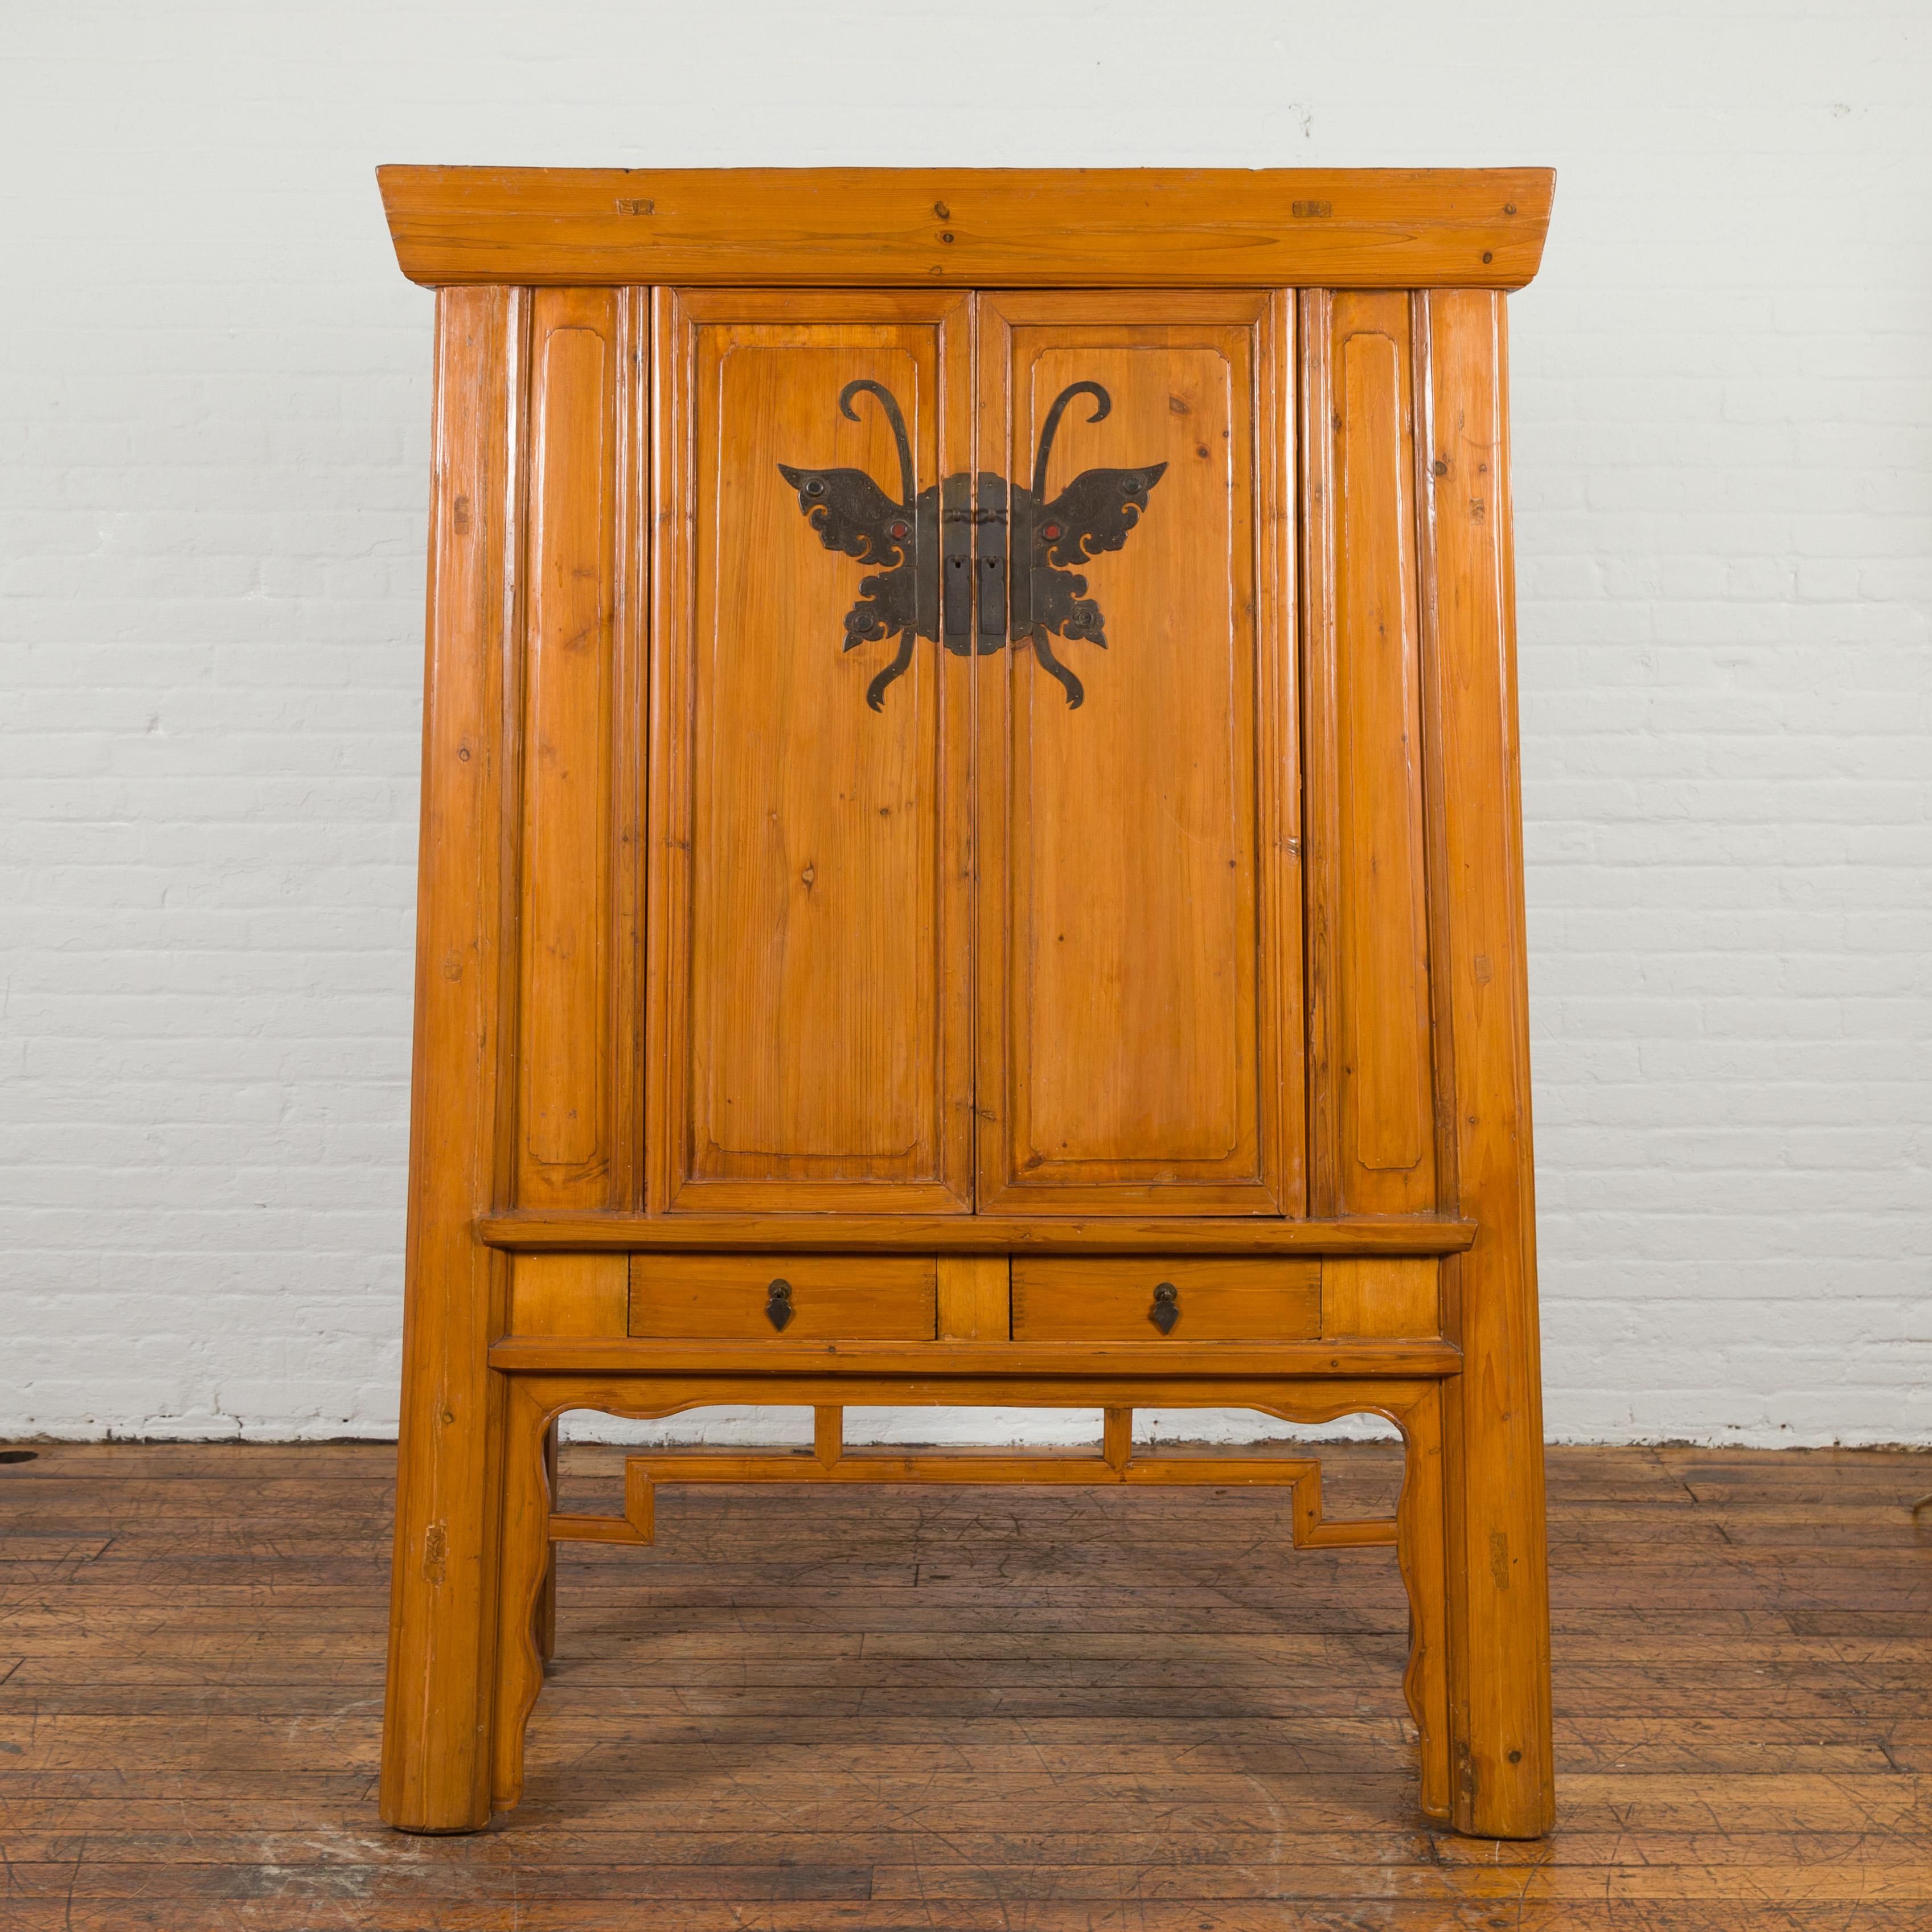 A Chinese vintage elmwood wedding cabinet from the mid 20th century, with butterfly hardware. Created in China during the midcentury period, this wedding cabinet features a beveled cornice sitting above a tapering structure. Showcasing a large